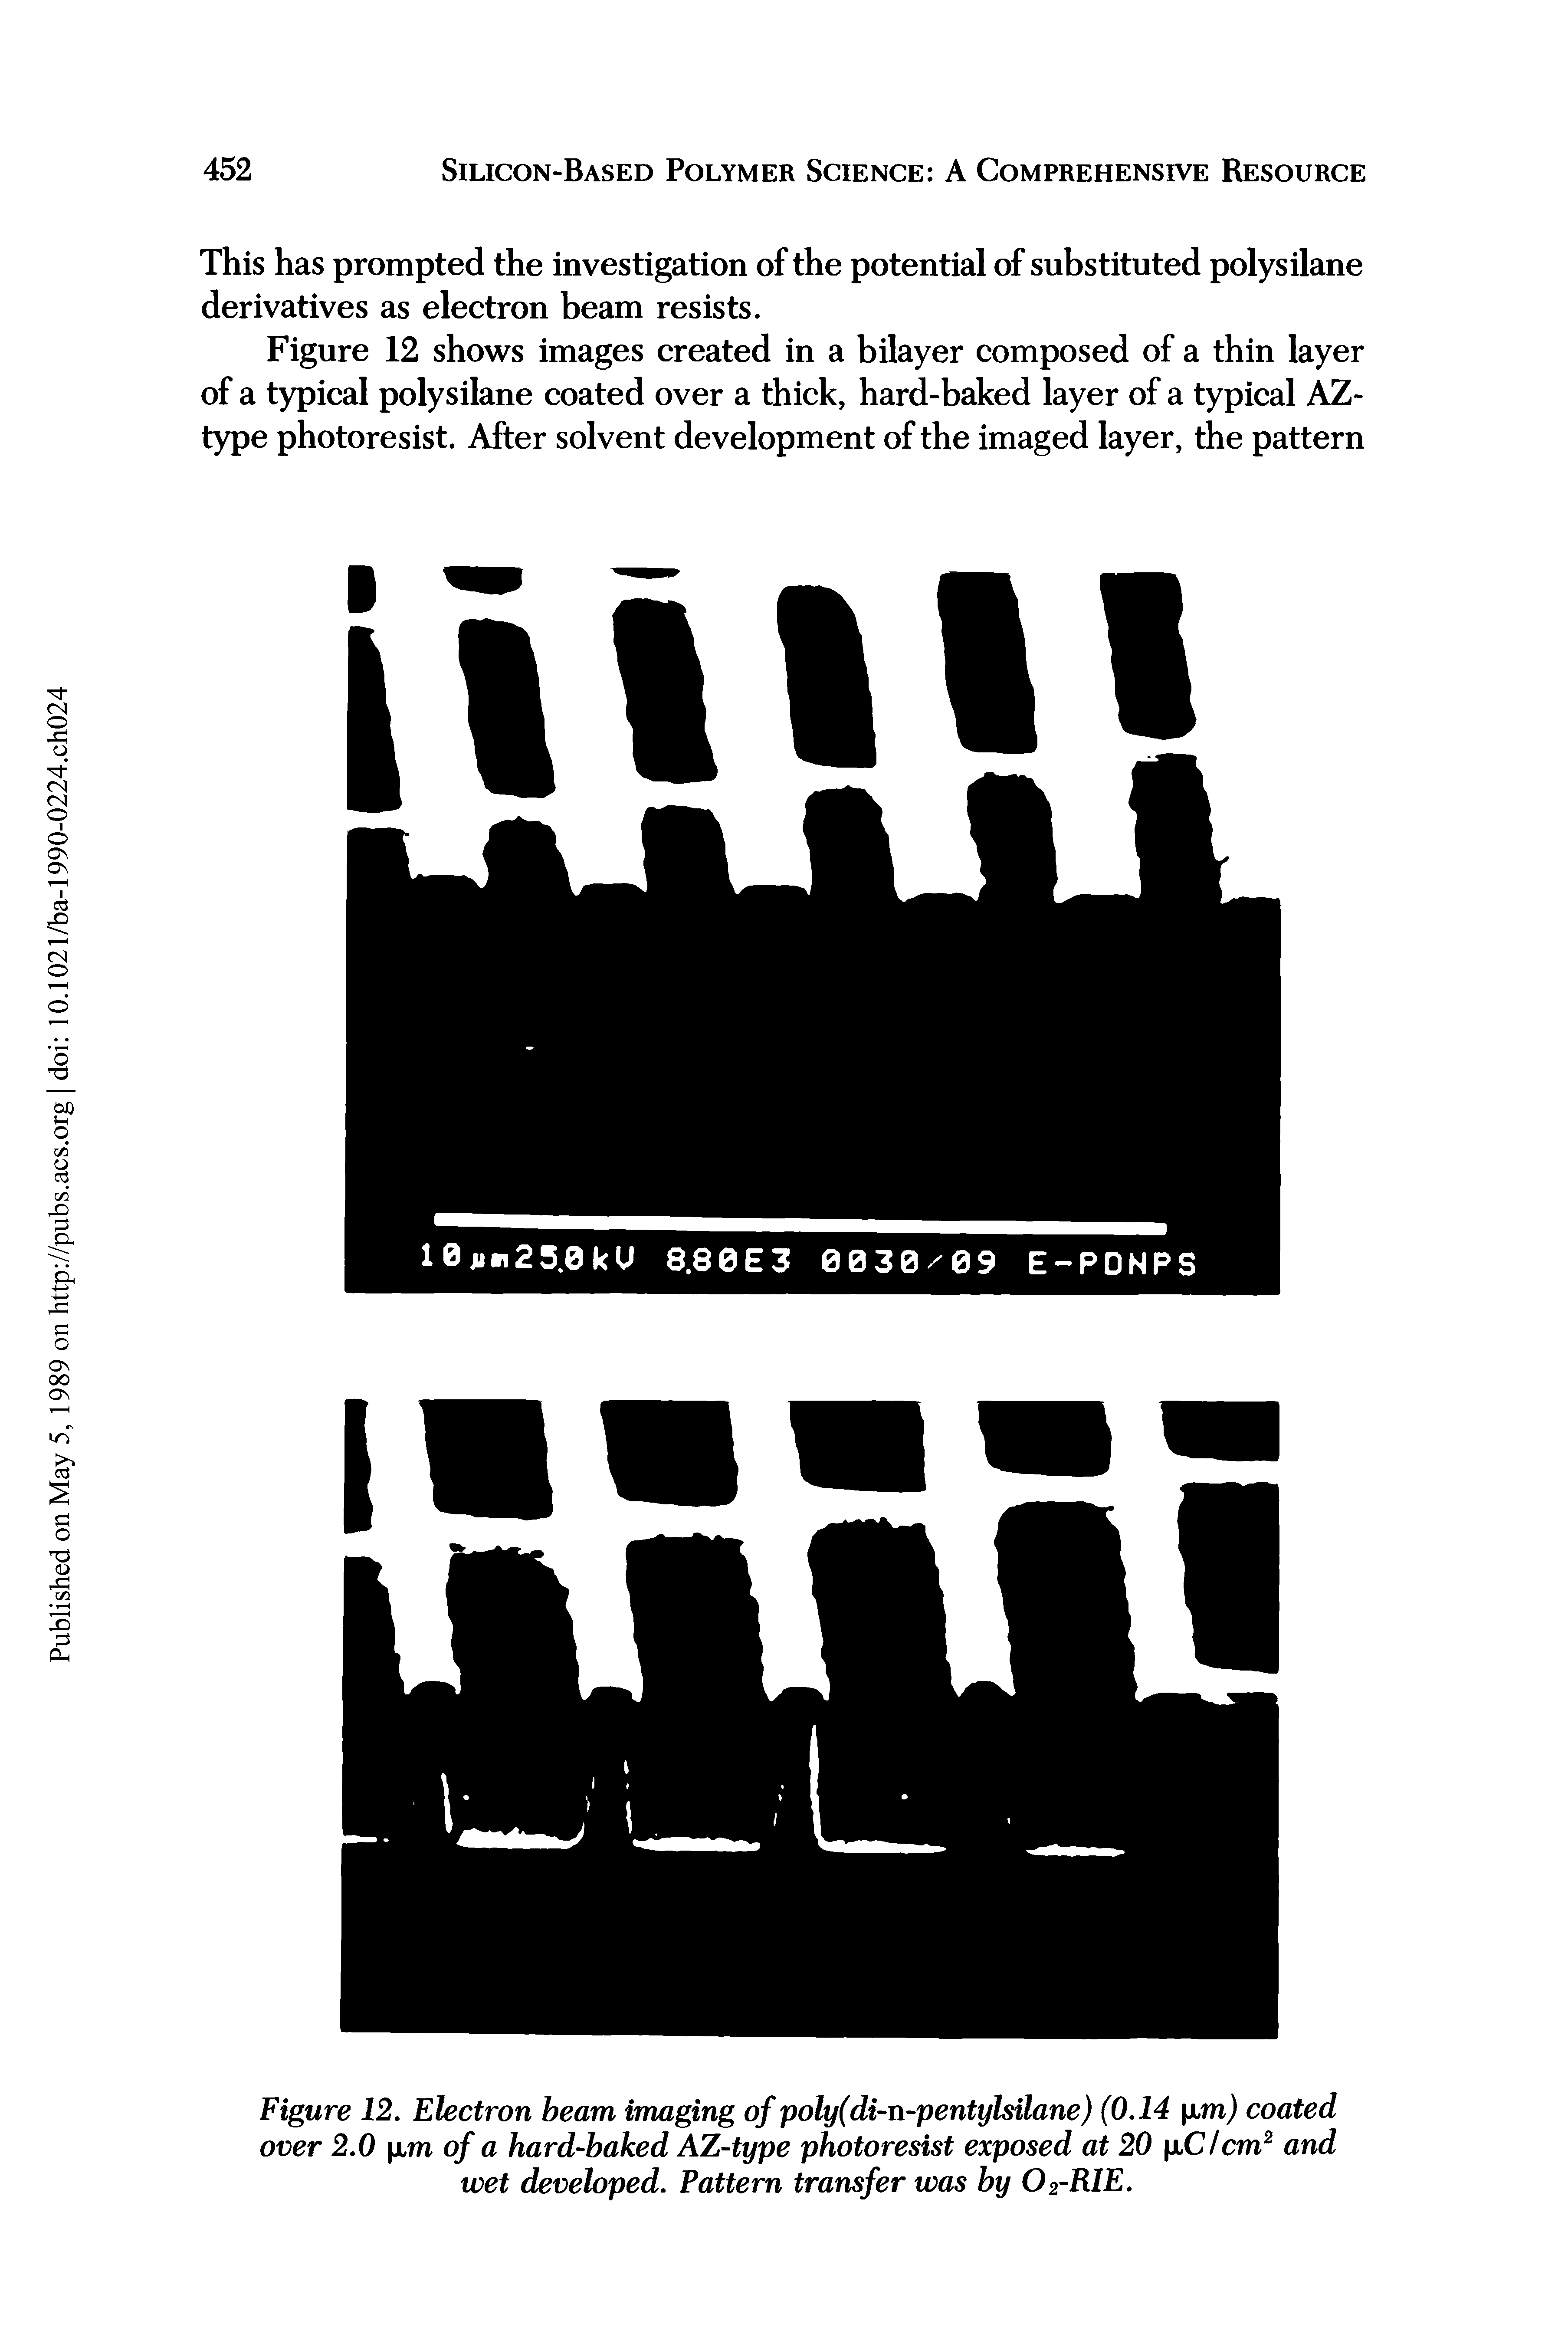 Figure 12. Electron beam imaging of poly(di-n-pentylsilane) (0.14 ym) coated over 2.0 xm of a hard-baked AZ-type photoresist exposed at 20 iClcm and wet developed. Pattern transfer was by O2-RIE.